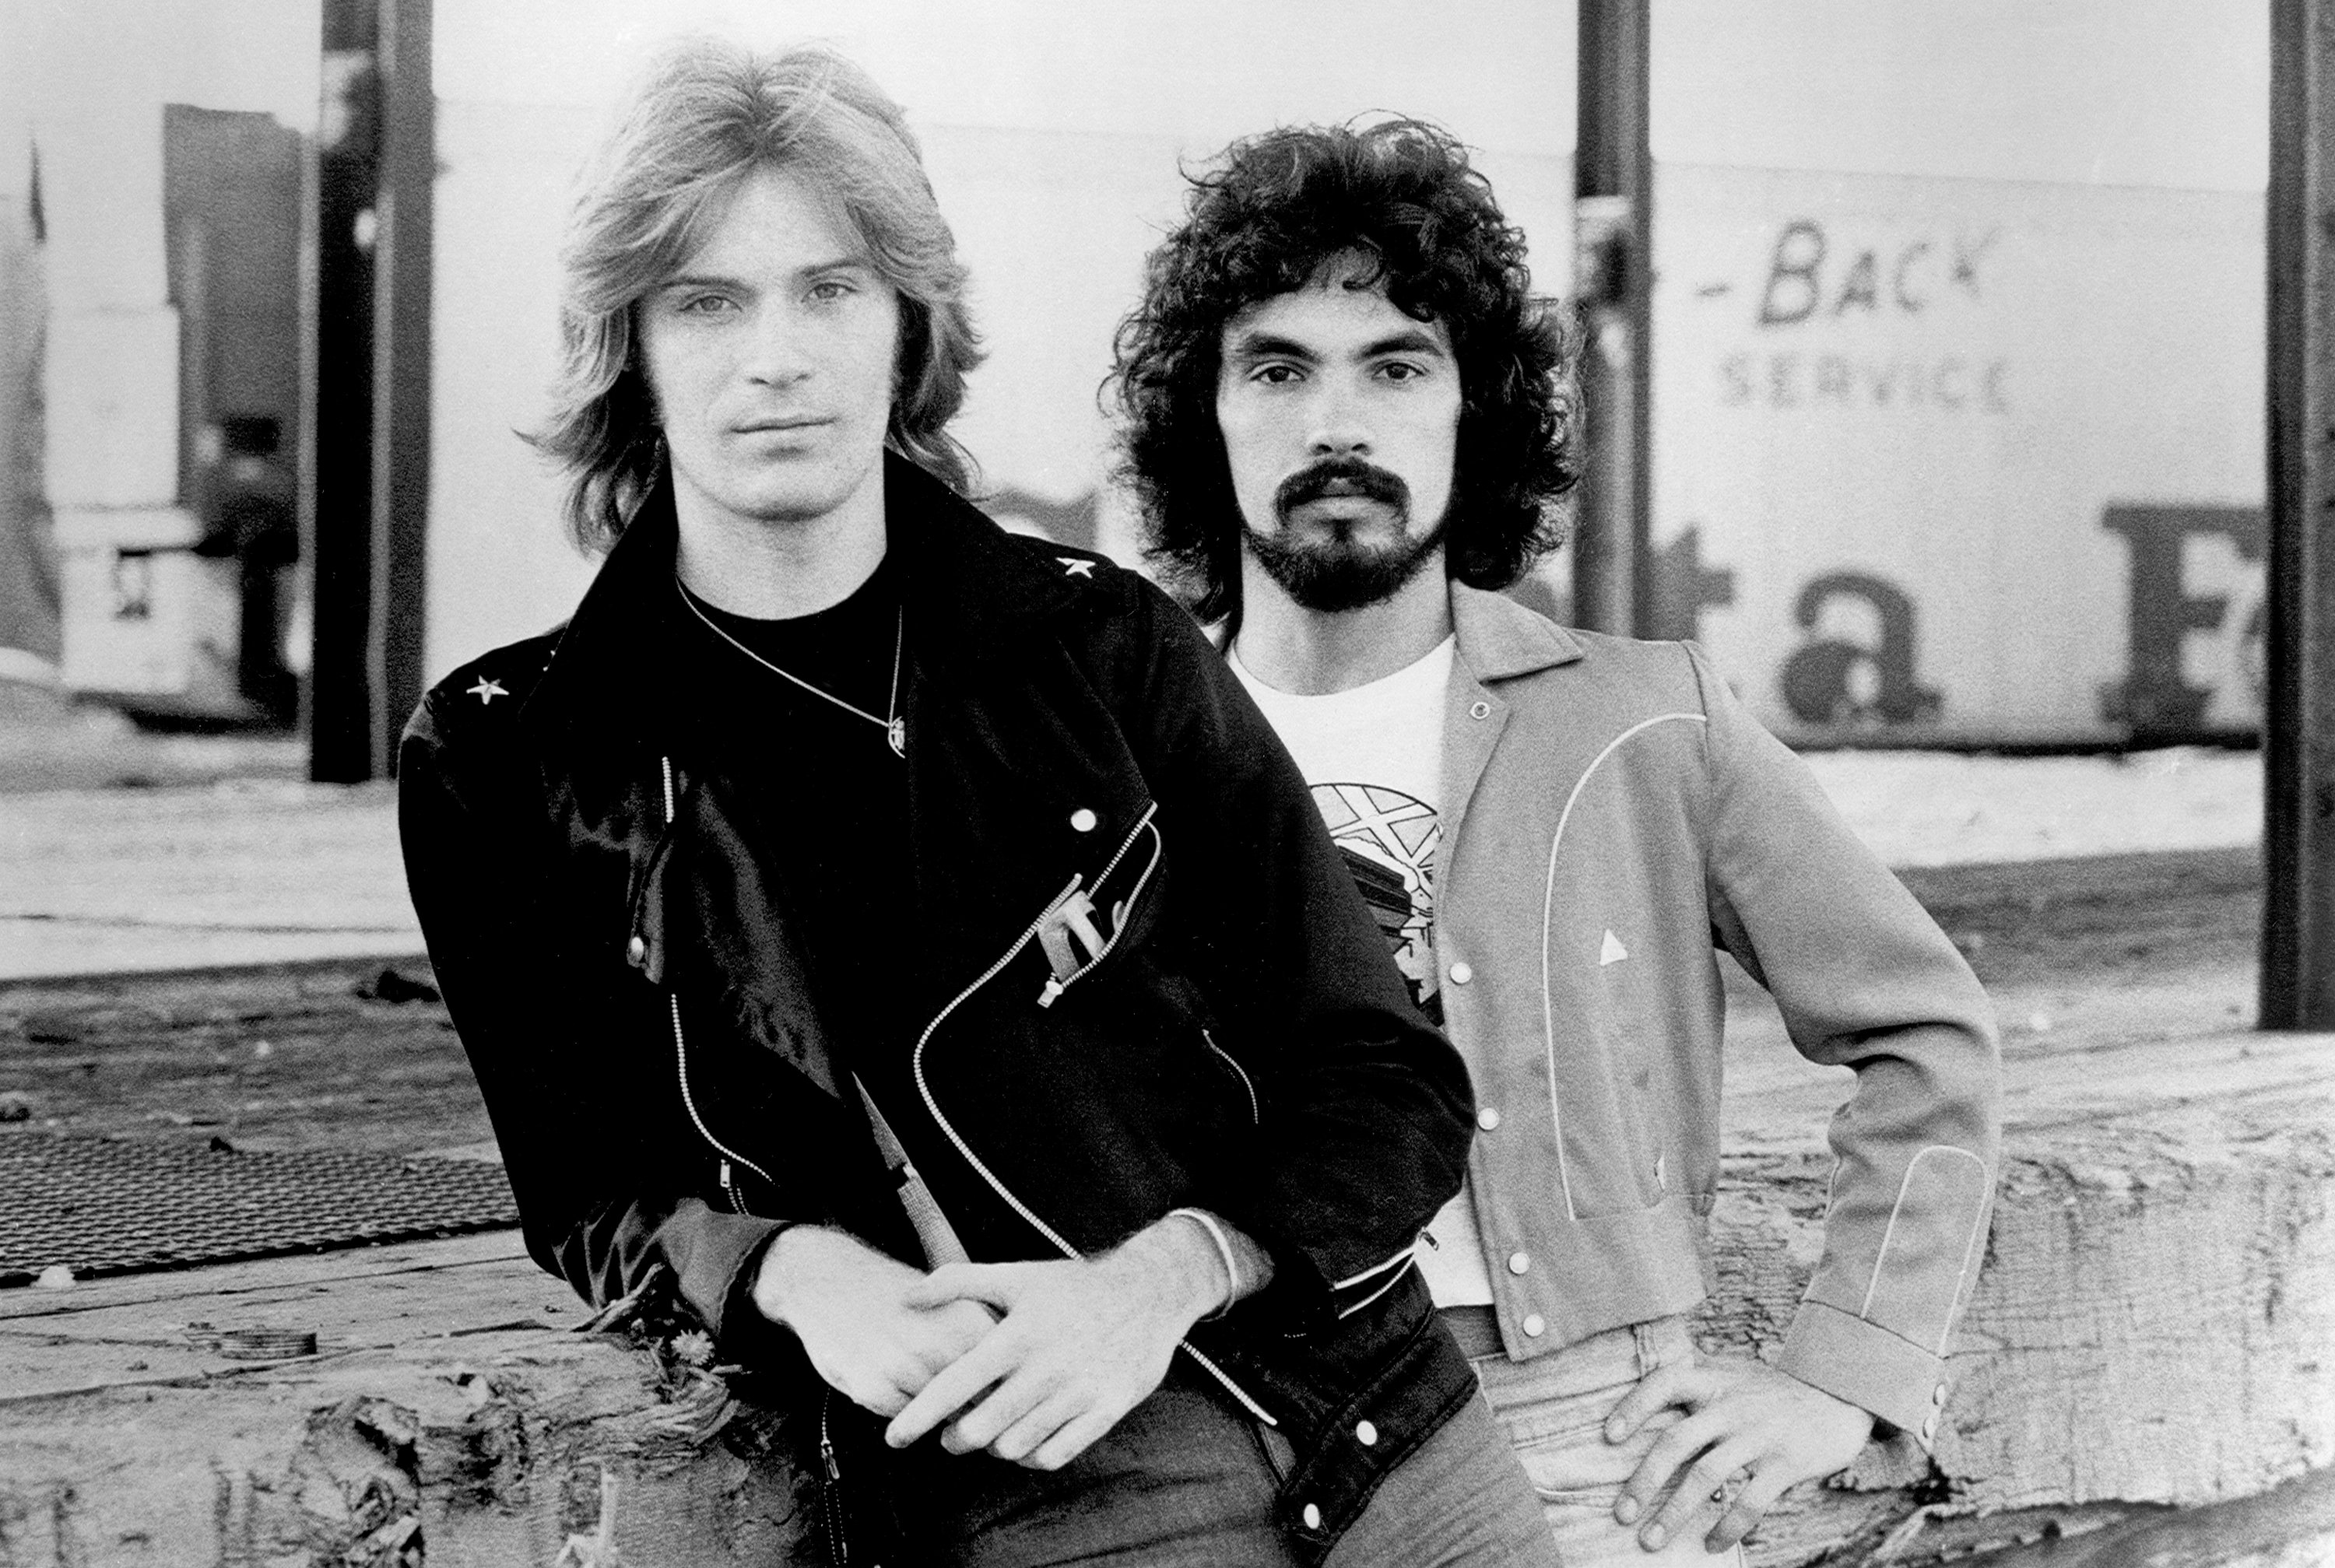 Daryl Hall and John Oates leaning on some wood